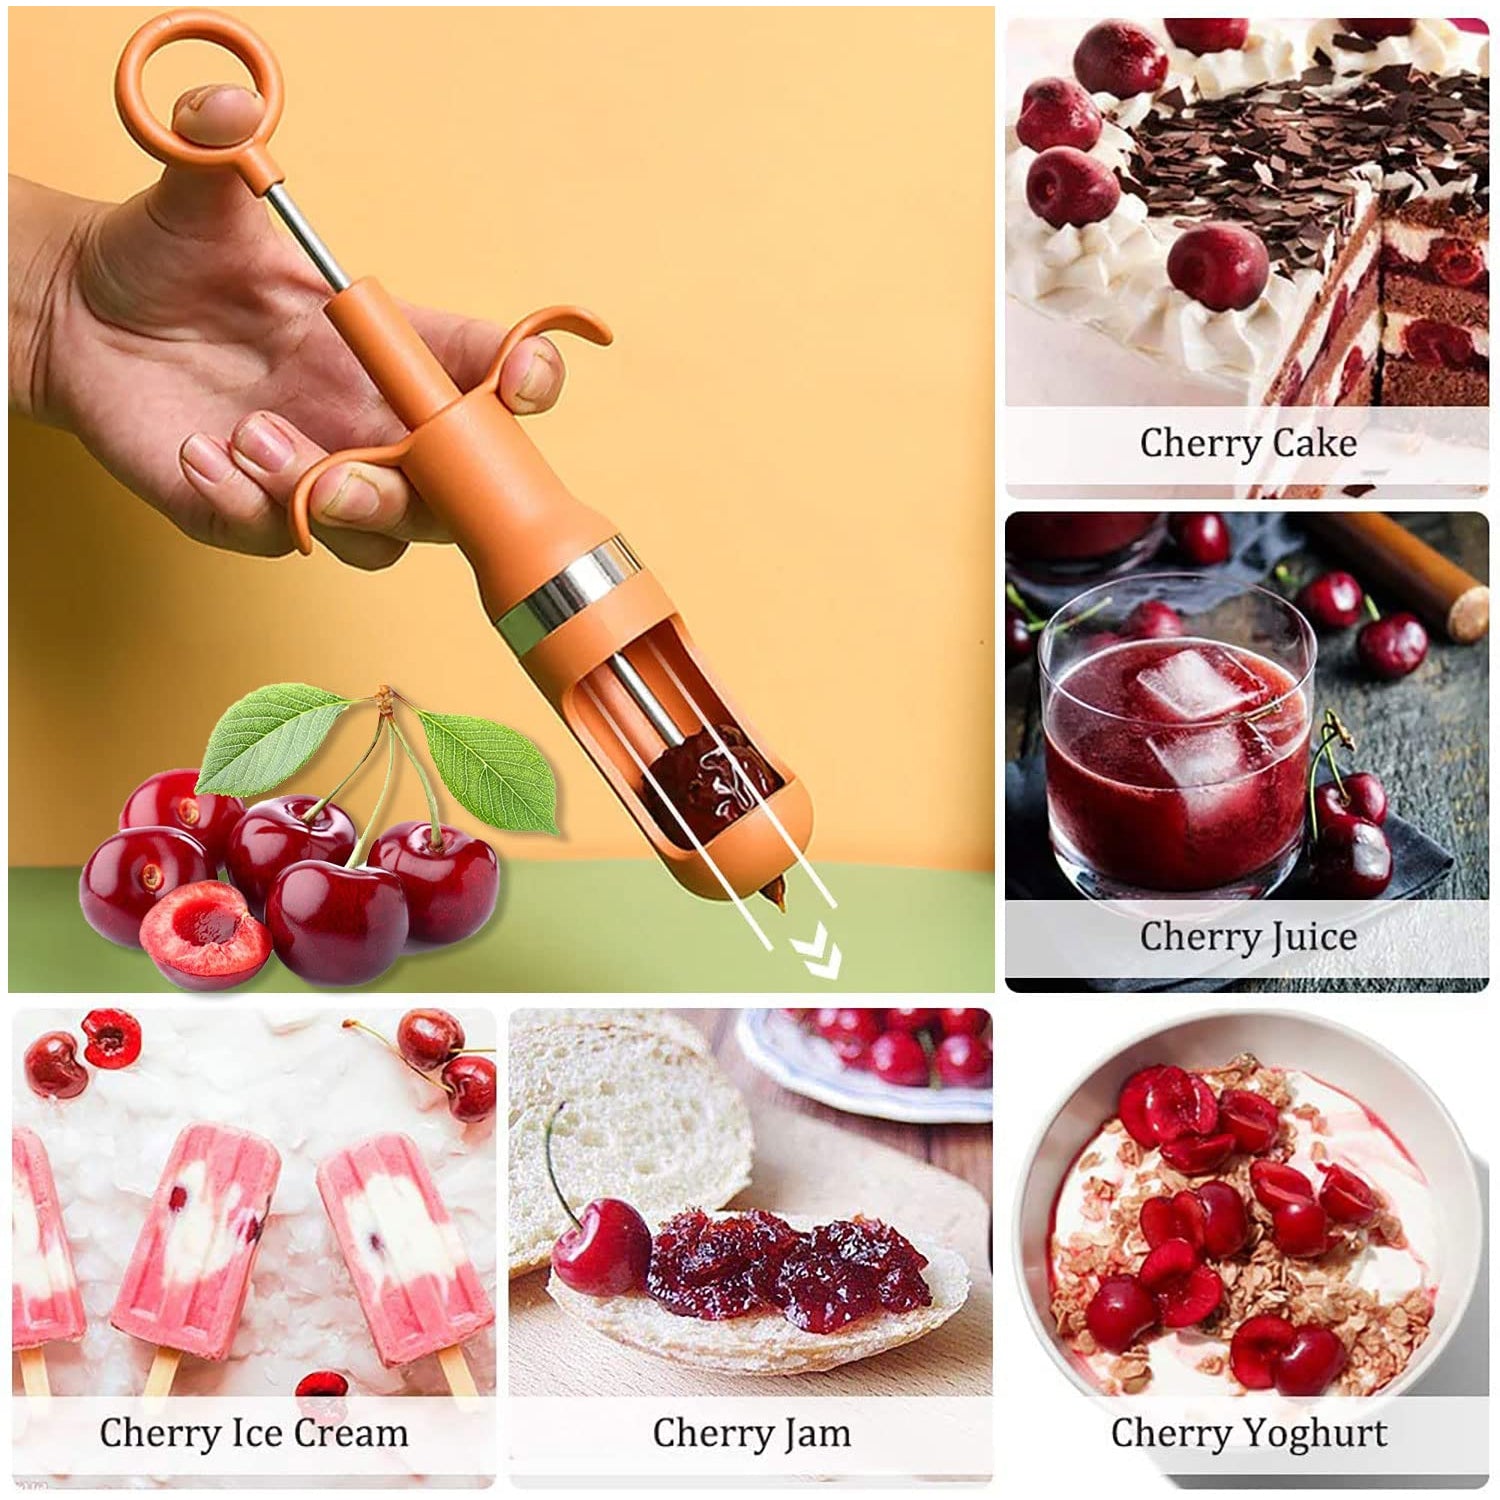 2508 Cherry Pitter Tool, One Hand Operation Cherry Corer Pitter Remover Tool Best, Cherry Pit Kitchen Tools for Cherries Jam Quick Removal Fruit Stones (1pc). DeoDap